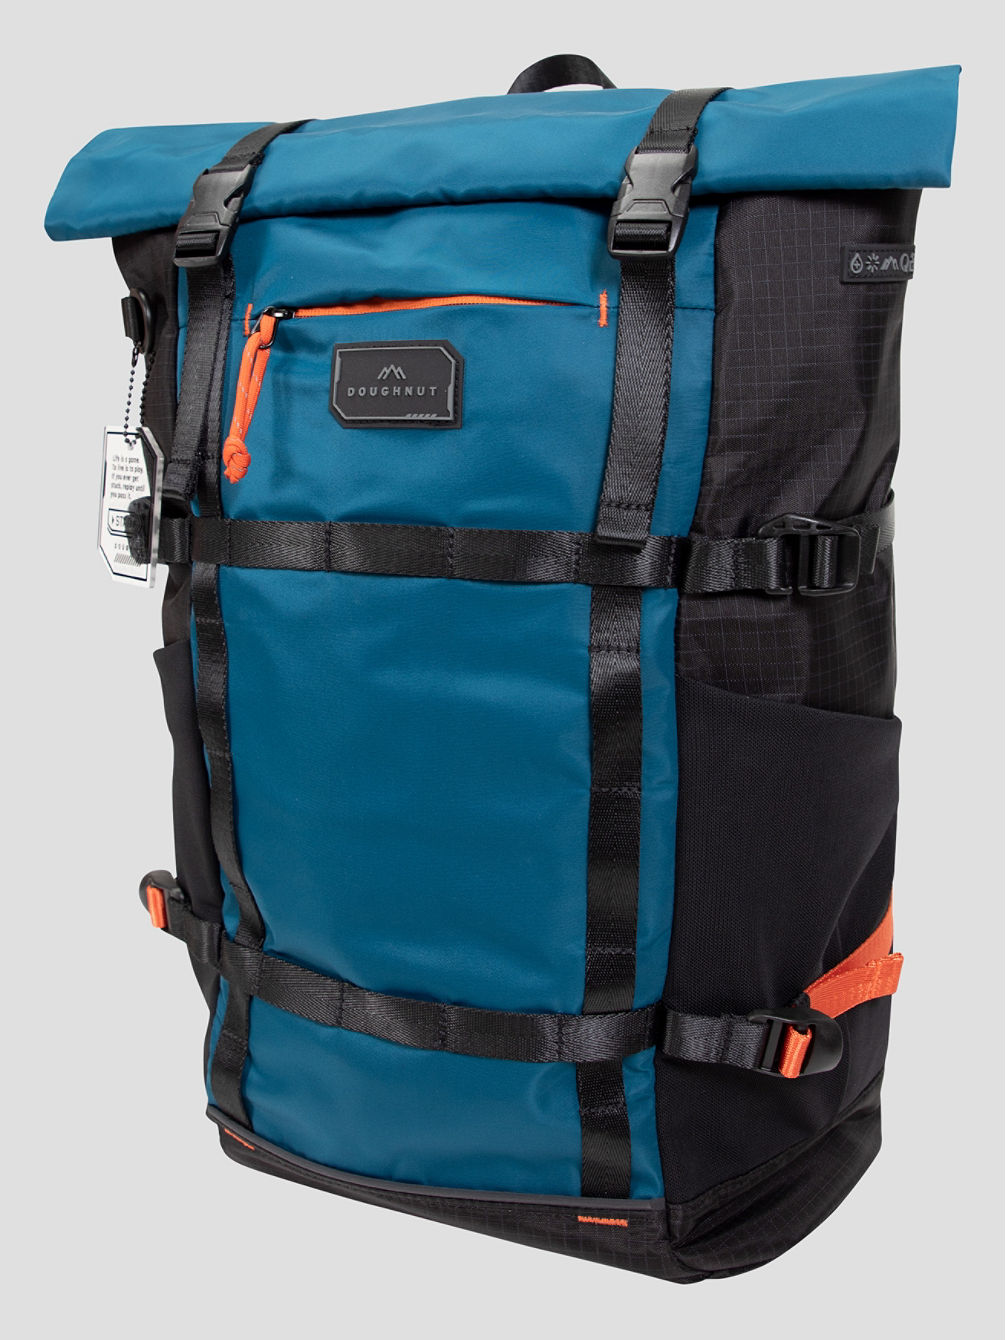 Paratrooper Gamescape Series Backpack